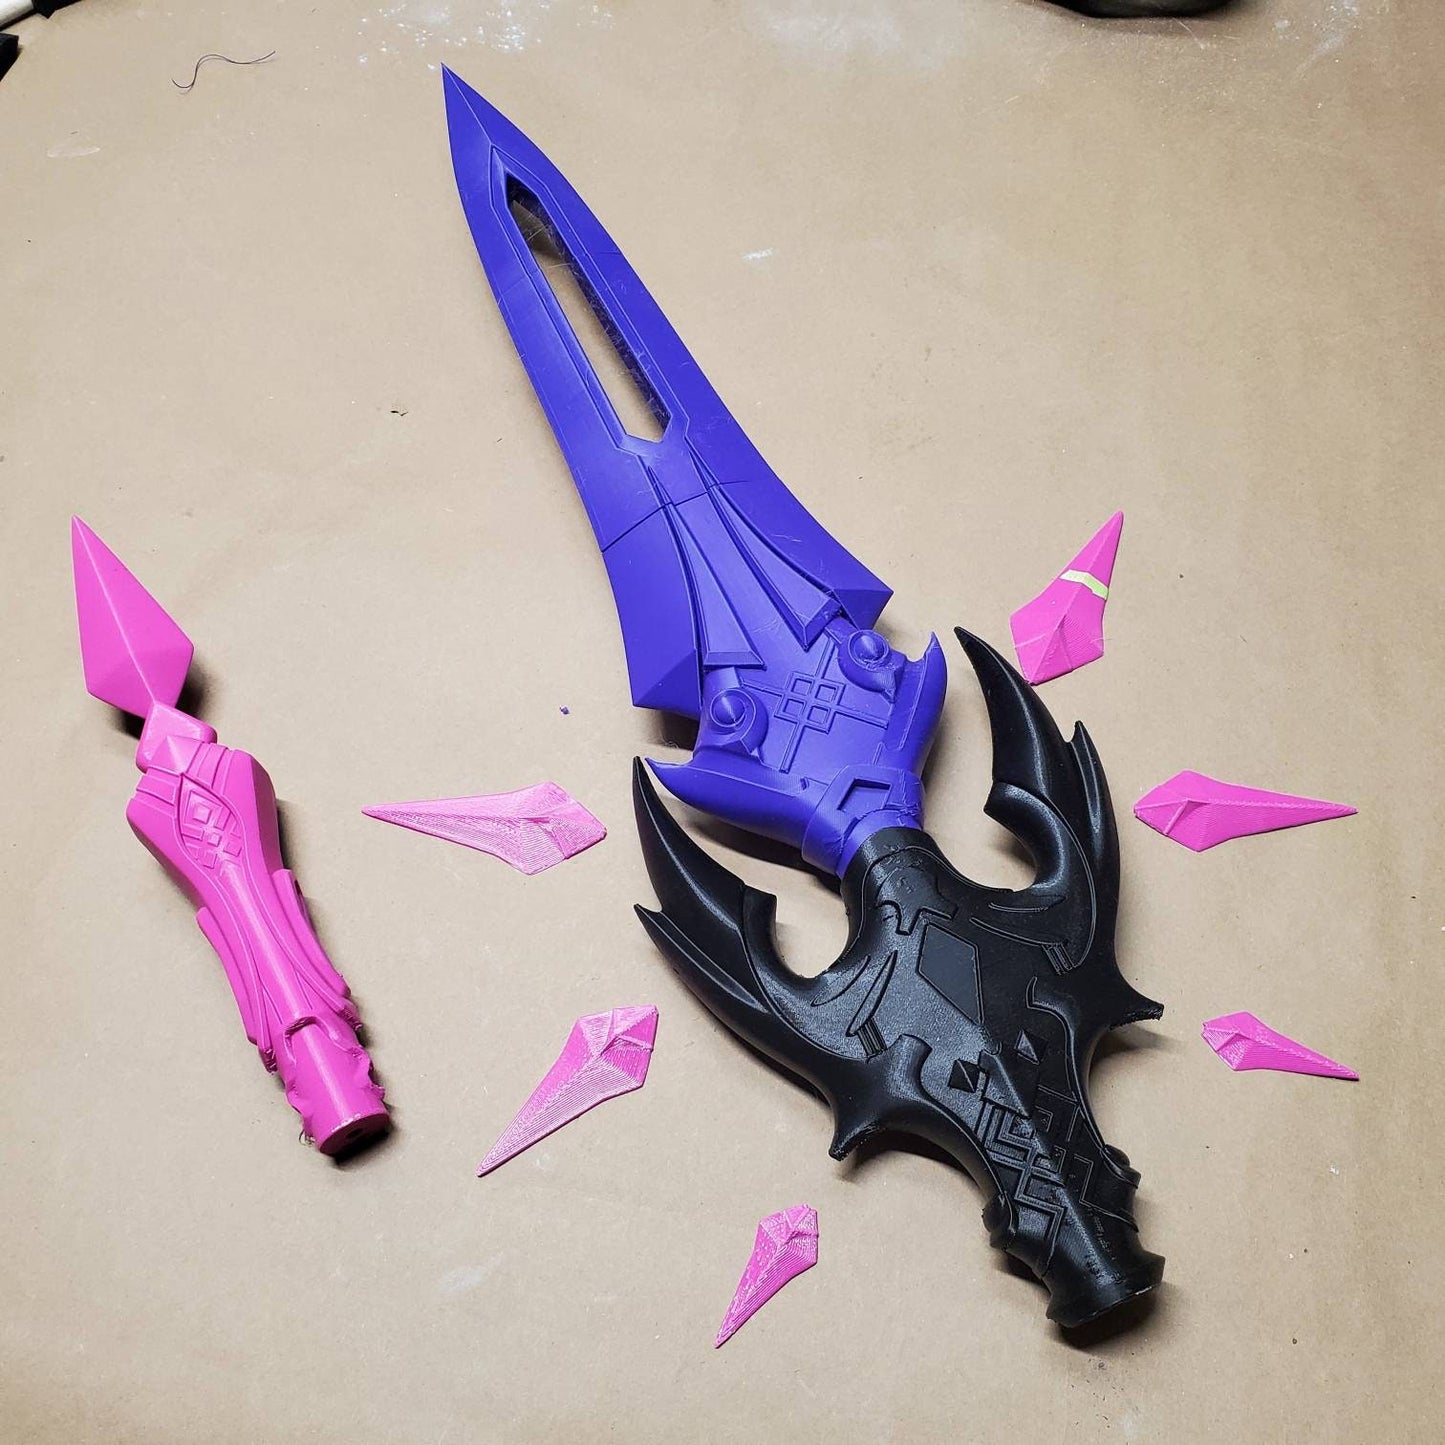 Genshin Impact Staff of homa  Cosplay - 3D printed spear kit